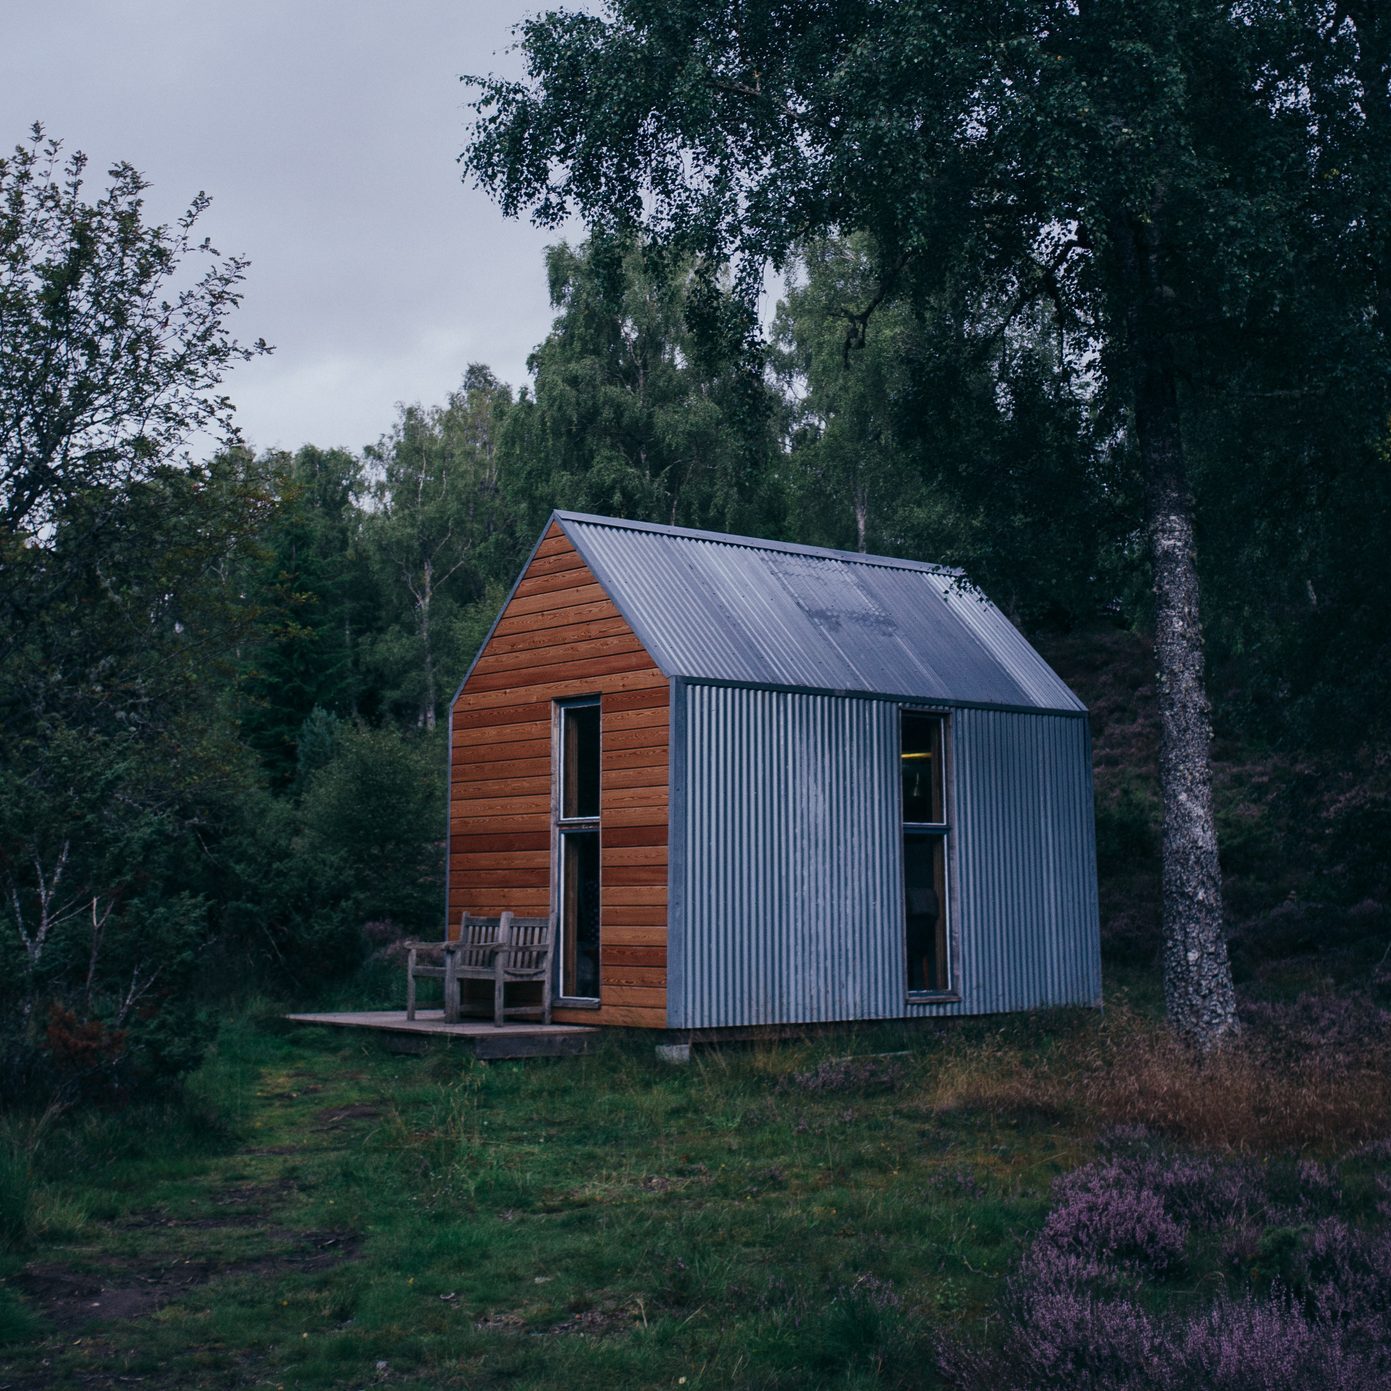 An off grid log cabin in the forest, locally known as a Bothy.